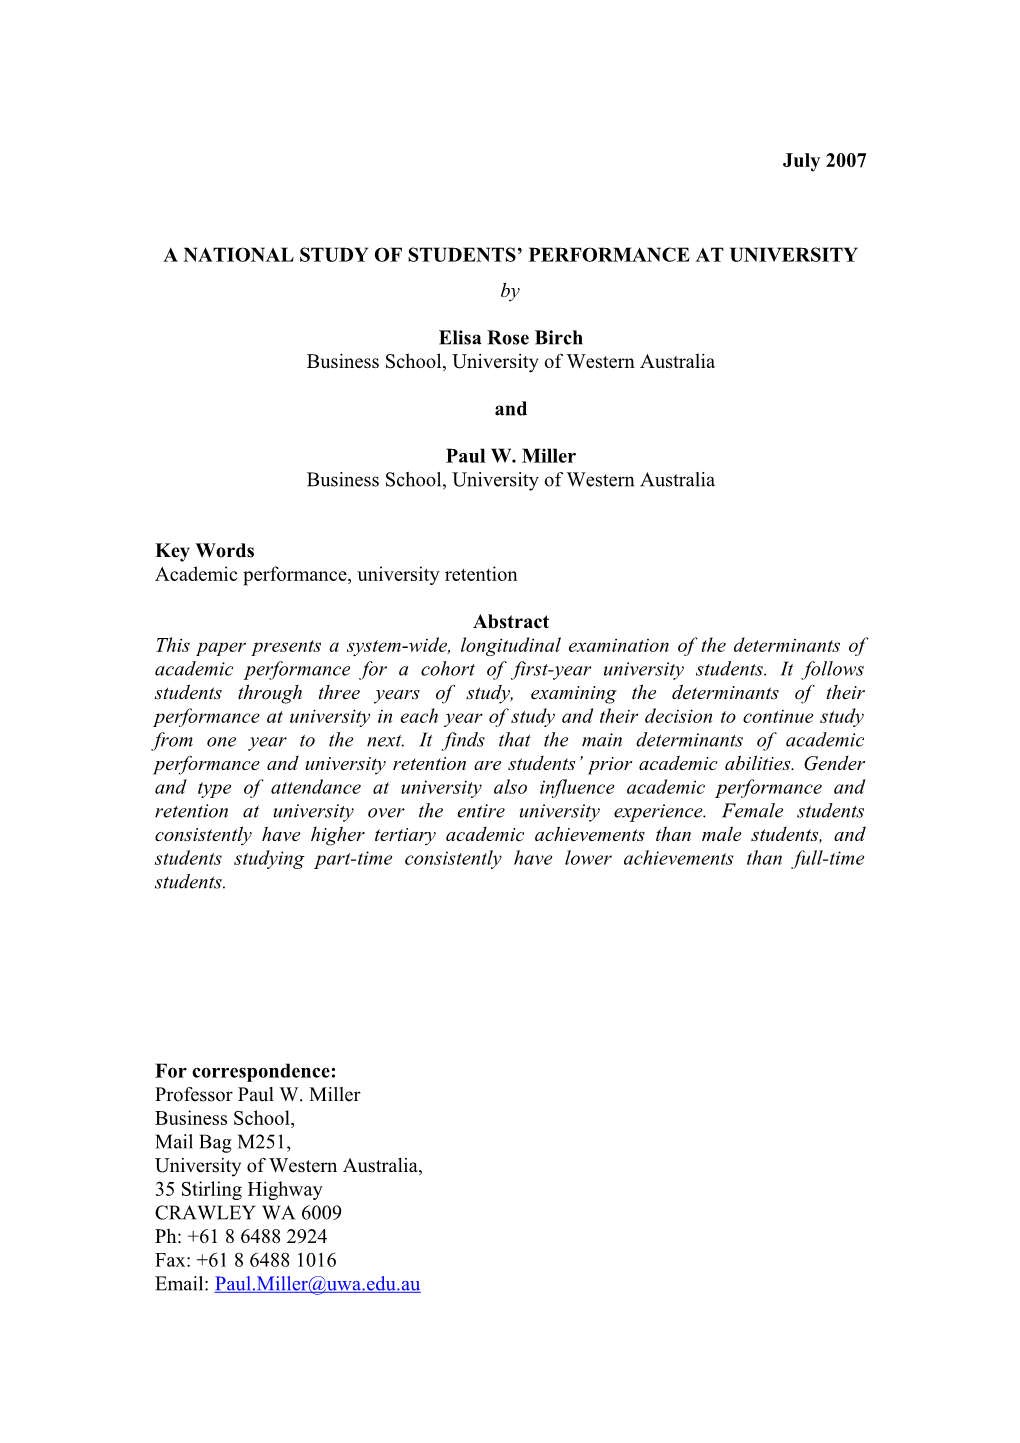 A National Study of Students Performance at University